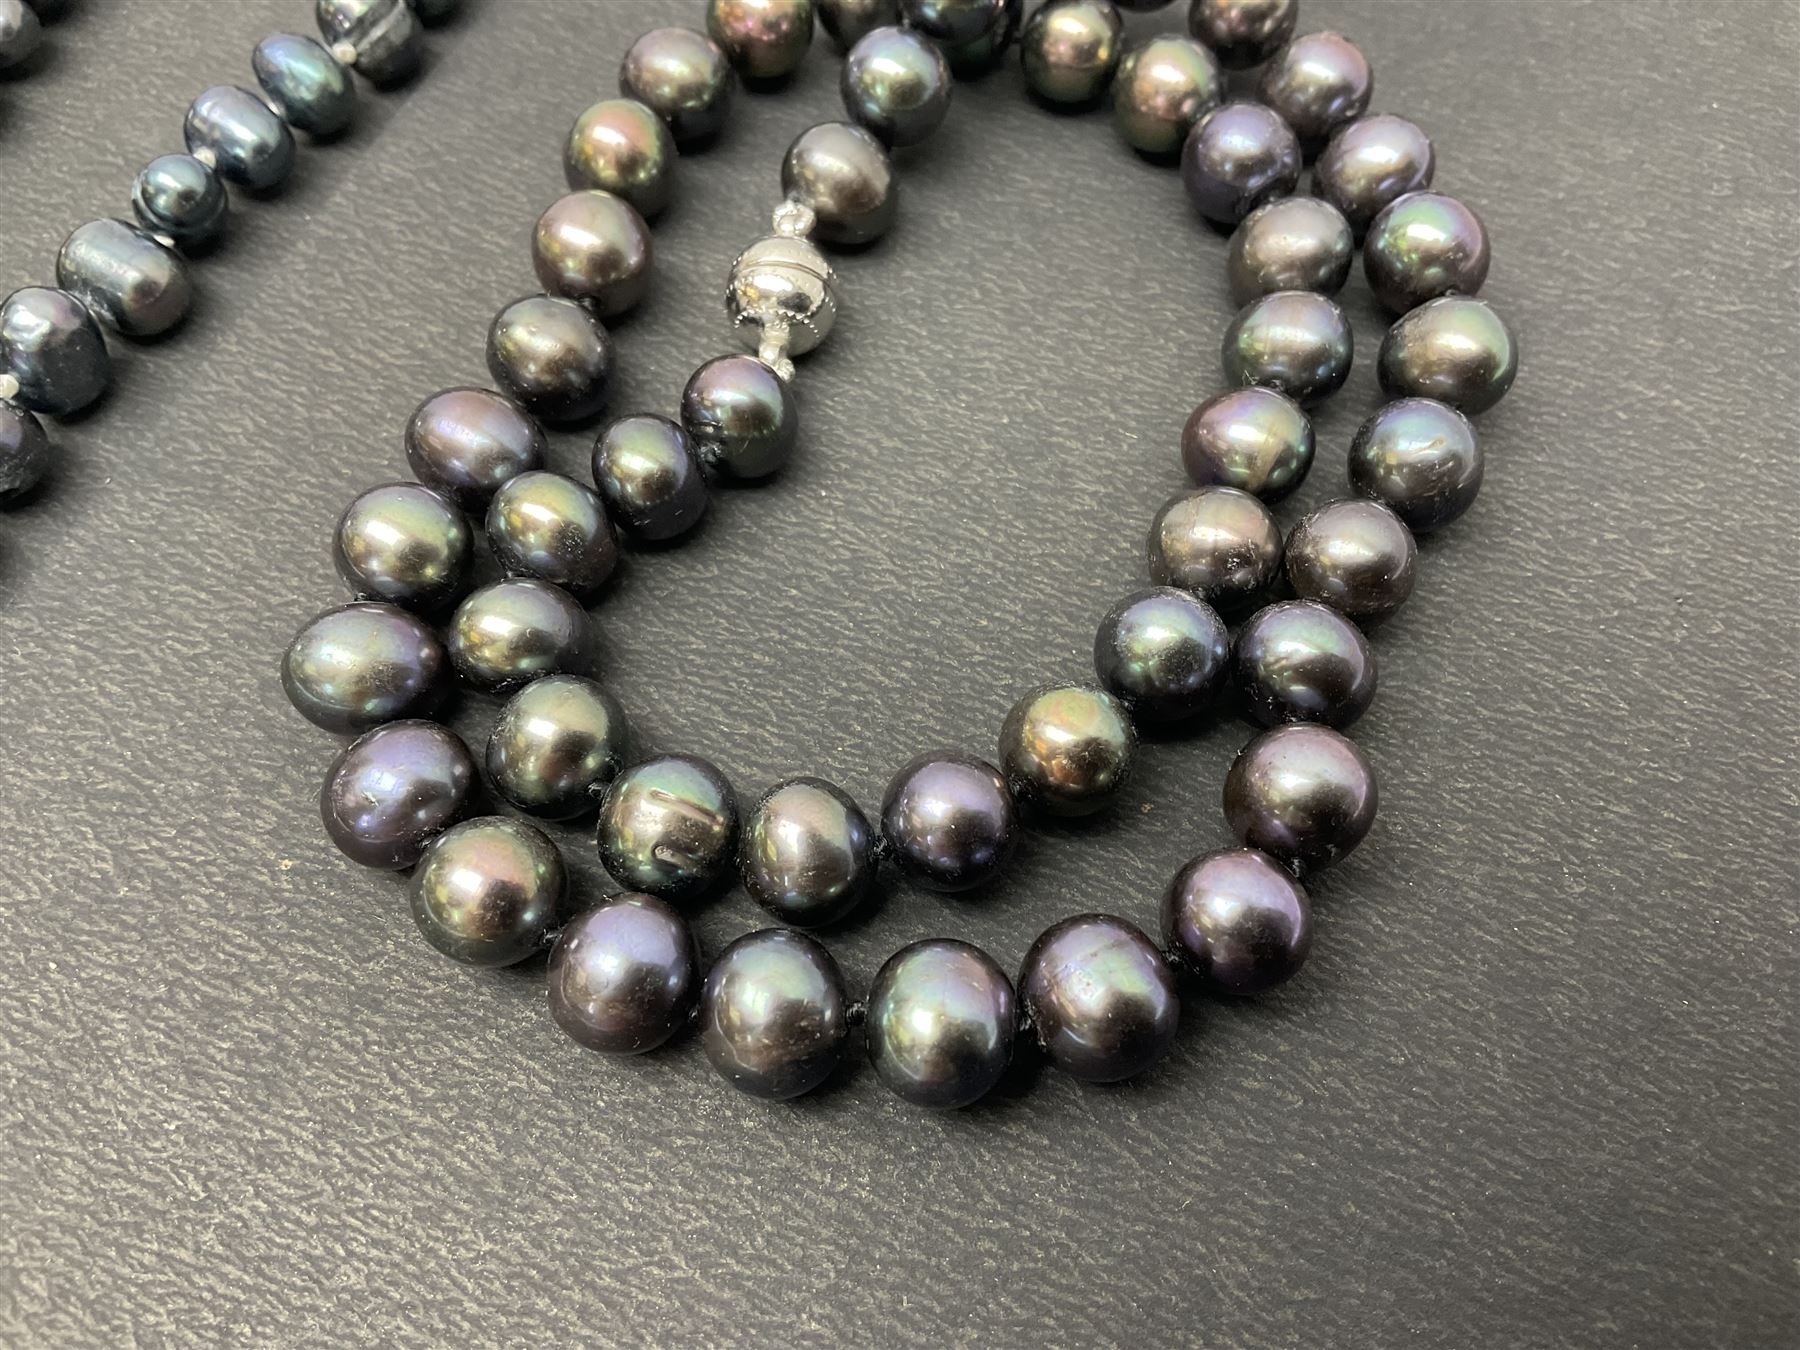 Four fresh water pearl necklaces - Image 3 of 77